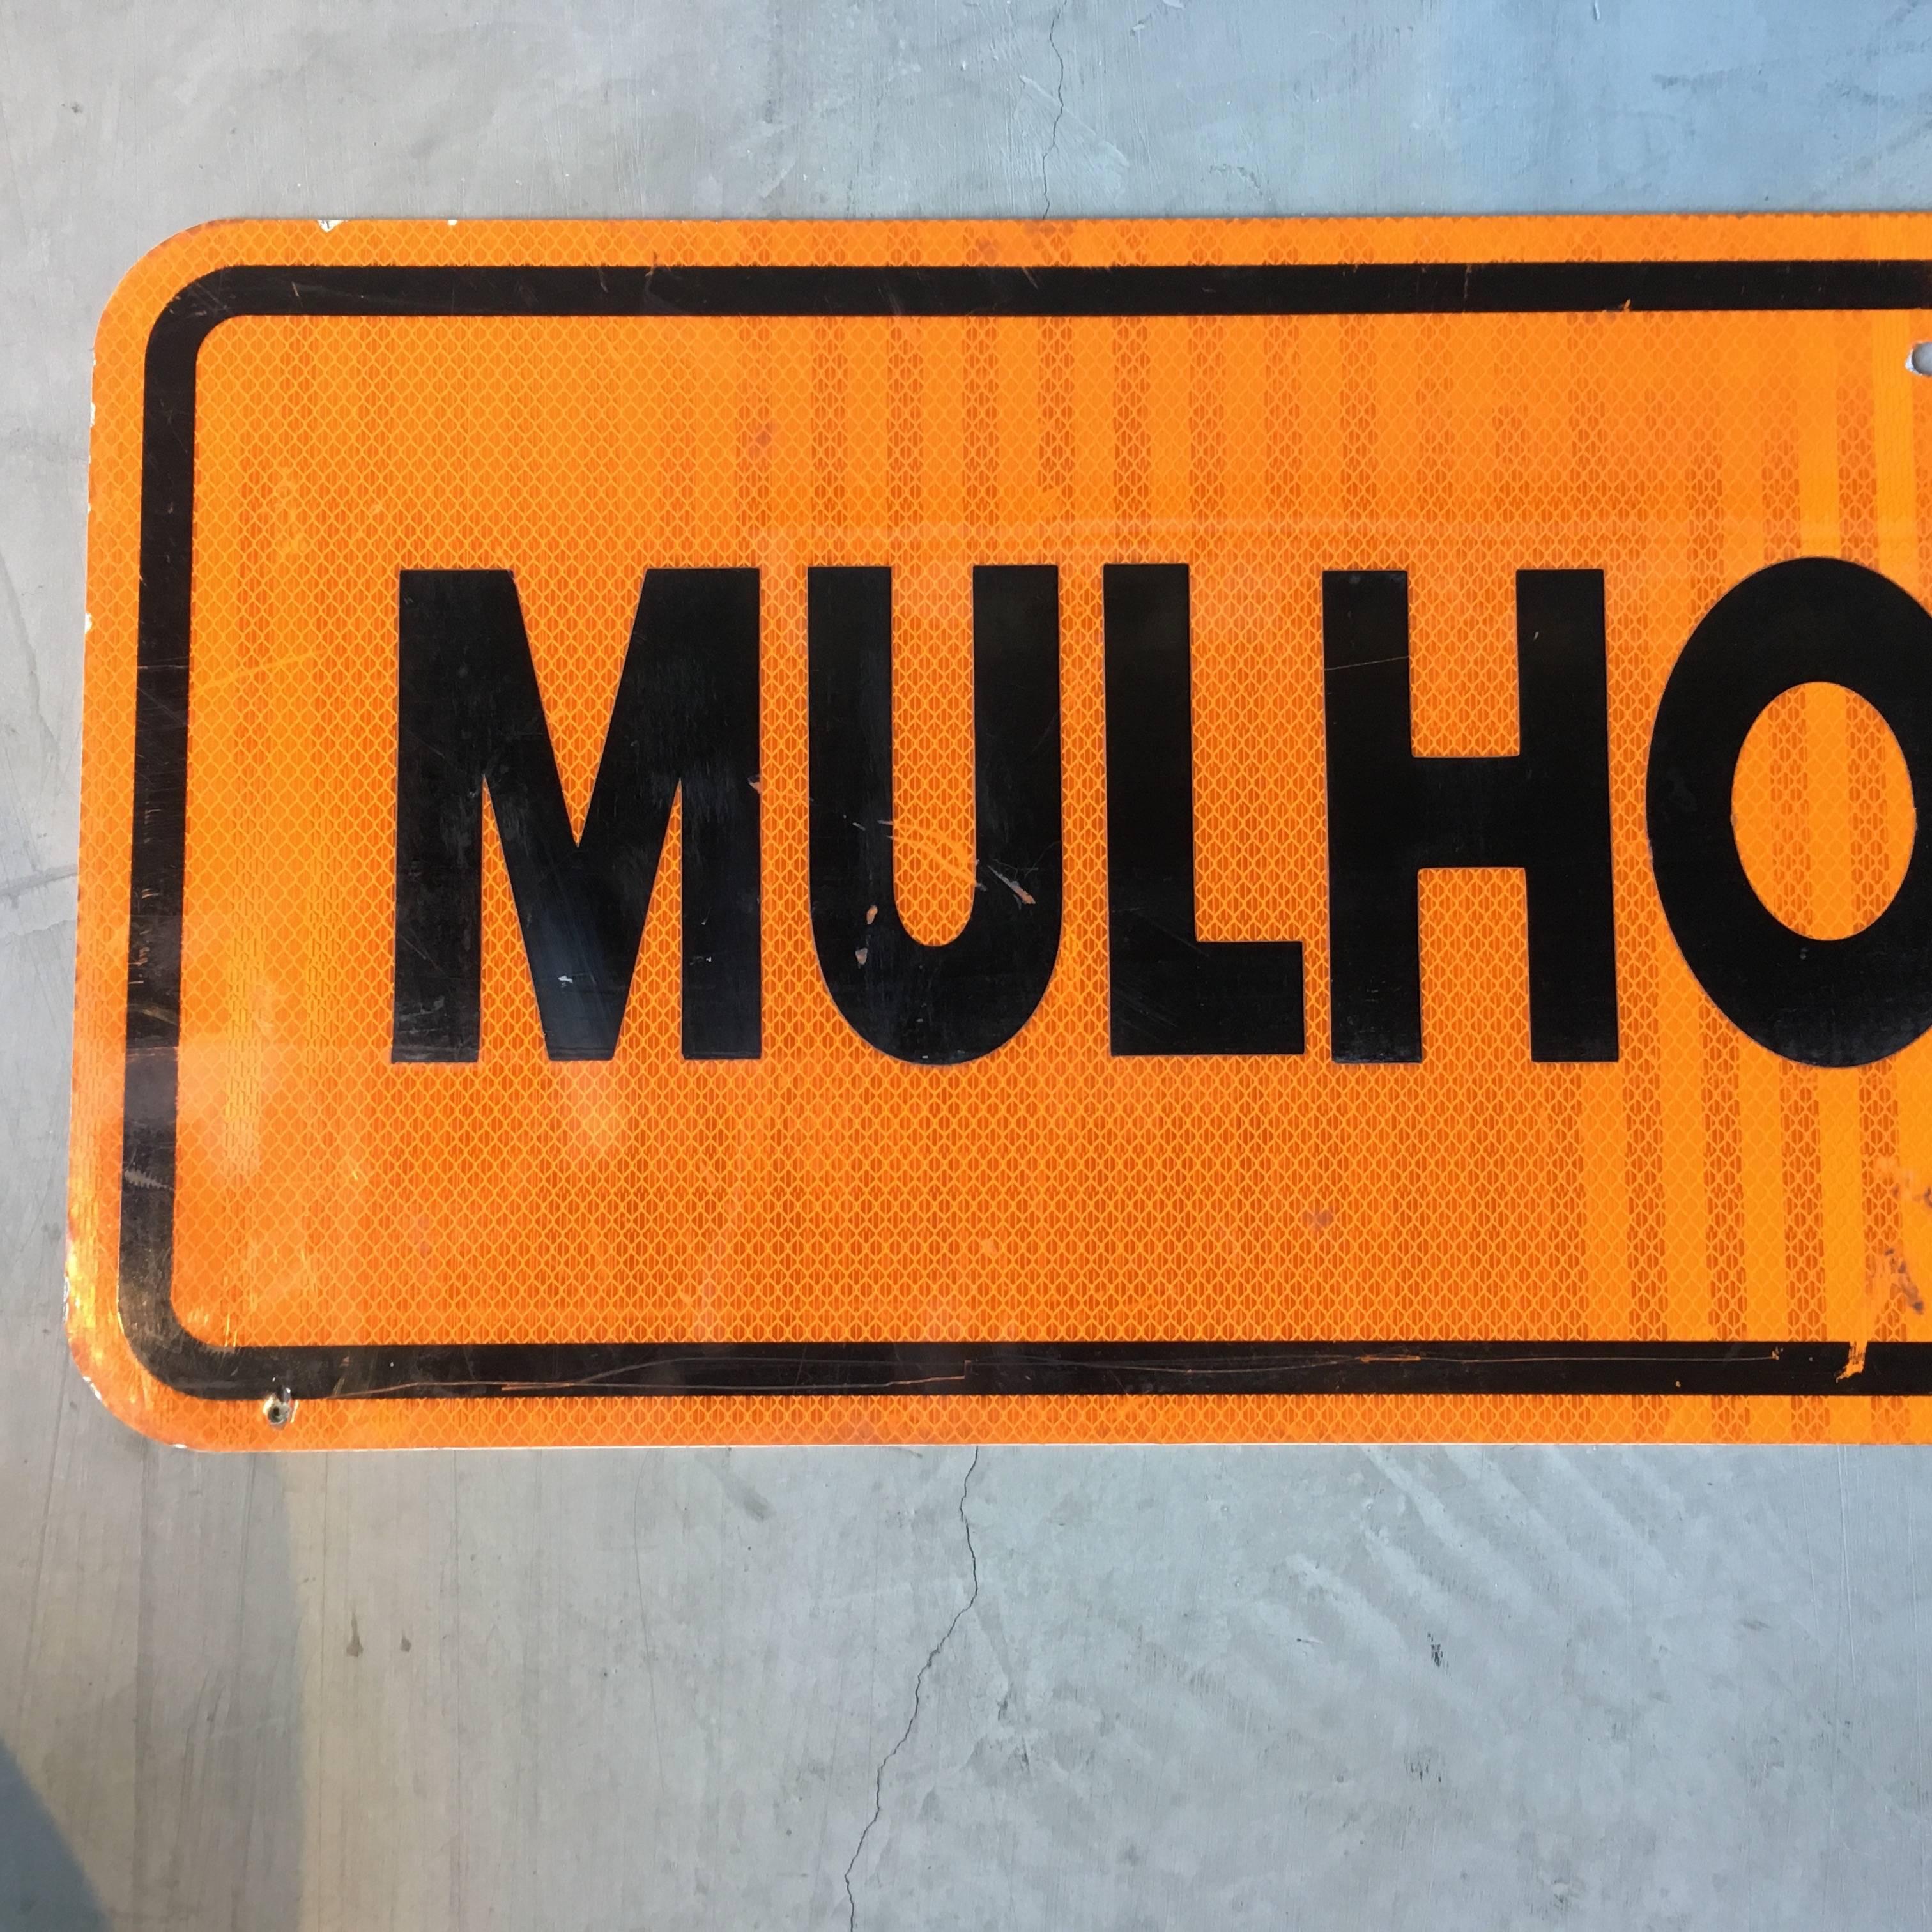 Very rare vintage Mulholland street sign. Rare orange color. Cool piece of Los Angeles history. Piece of old Hollywood ephemera. Large-scale.